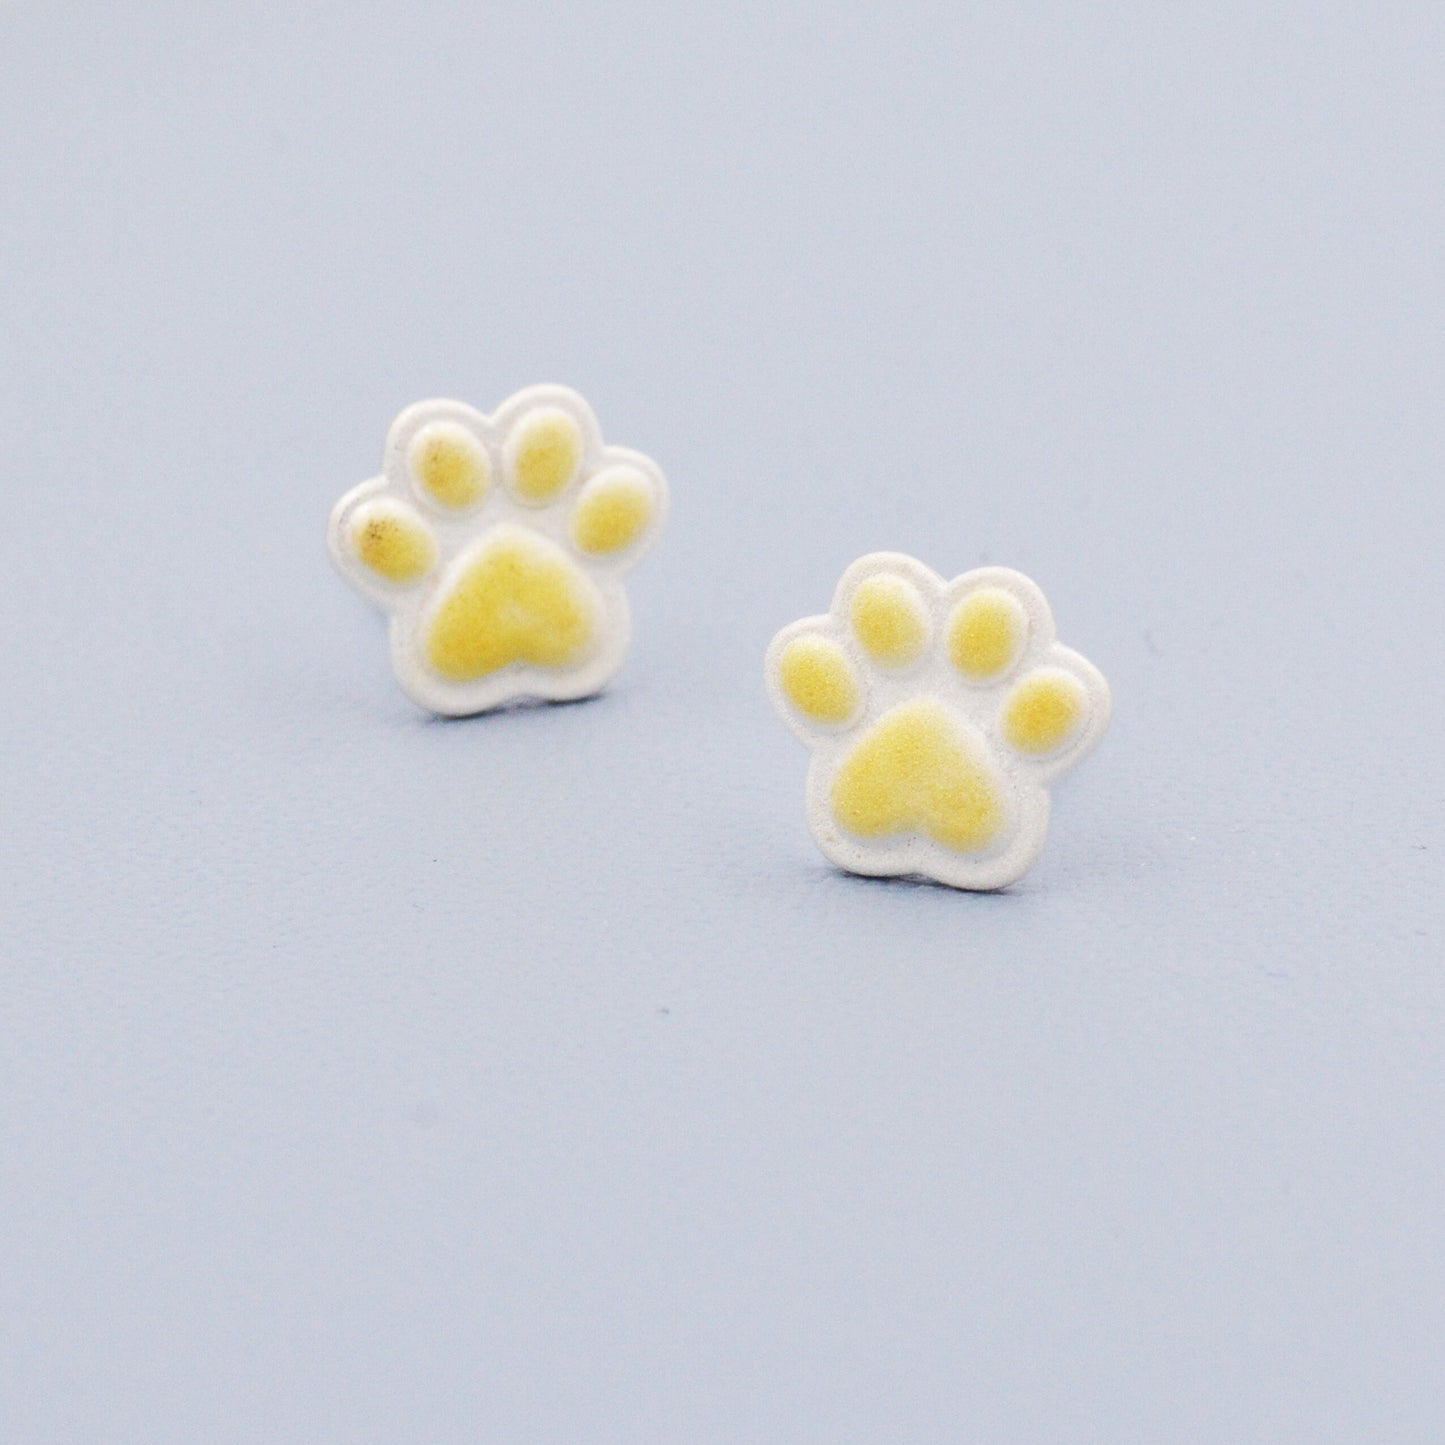 Cute Paw Print Stud Earrings in Sterling Silver - Dog Paw, Cat Paw Stud Earrings - Frosted Finish - Pet Lover - Cute,  Fun, Whimsical